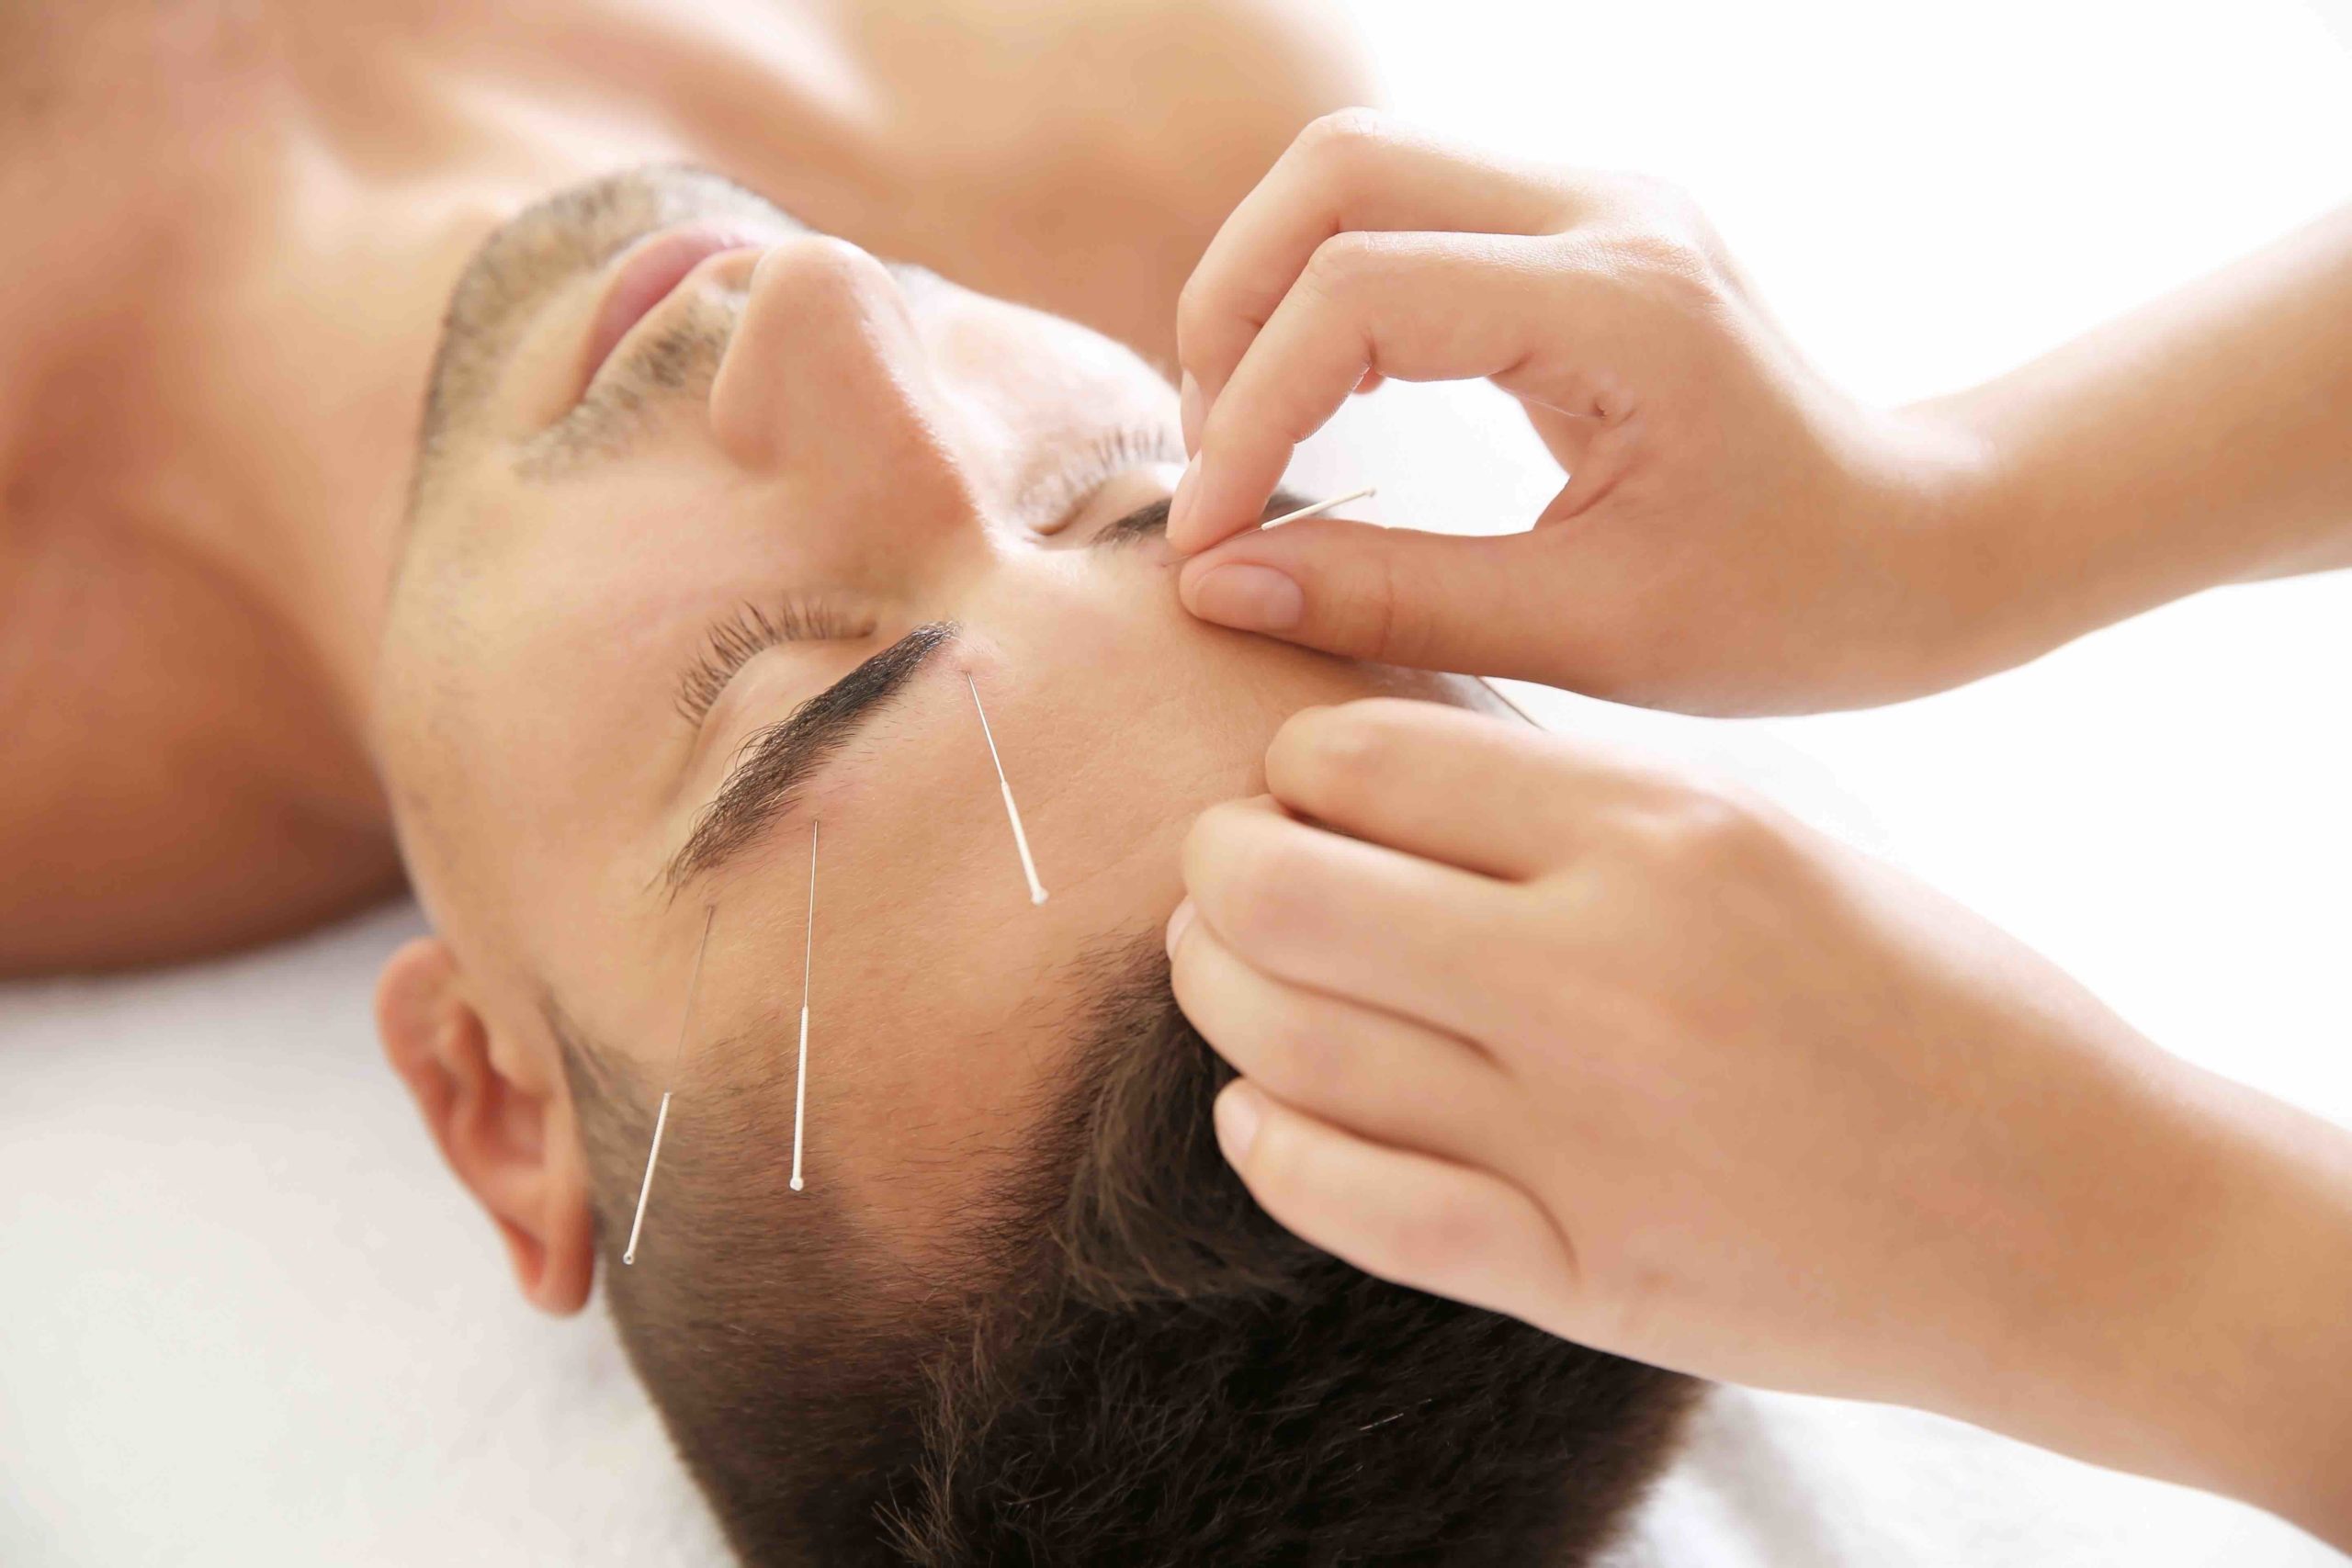 From Face Acupuncture to Fertility Acupuncture, Here’s Everything Acupuncture Can Do For You